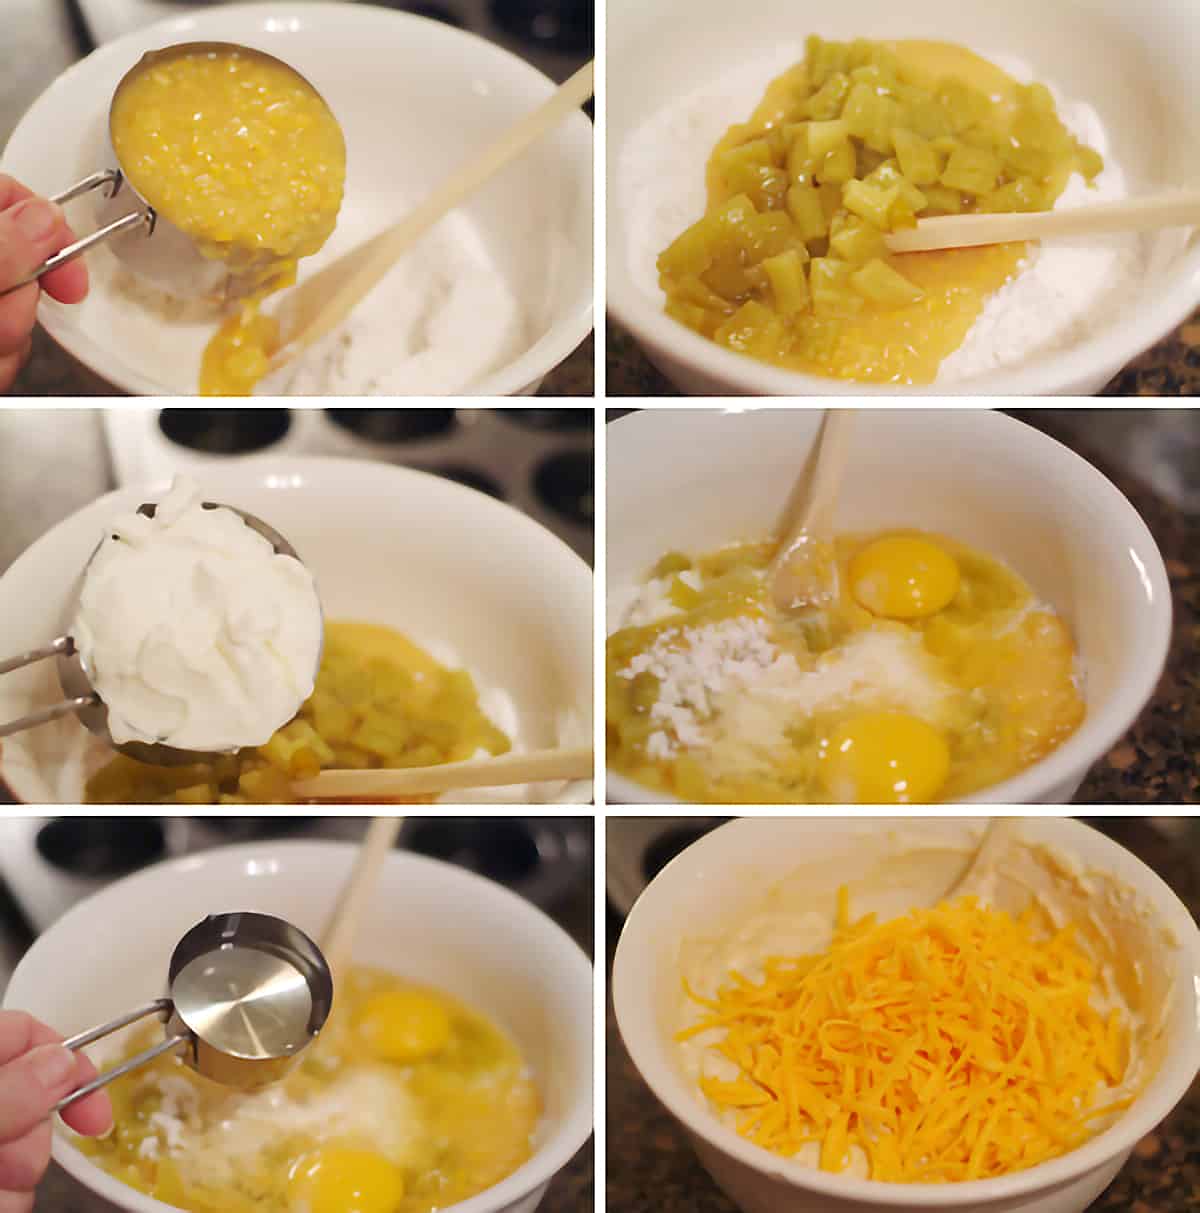 Collage showing individual wet ingredients being measured into a mixing bowl.